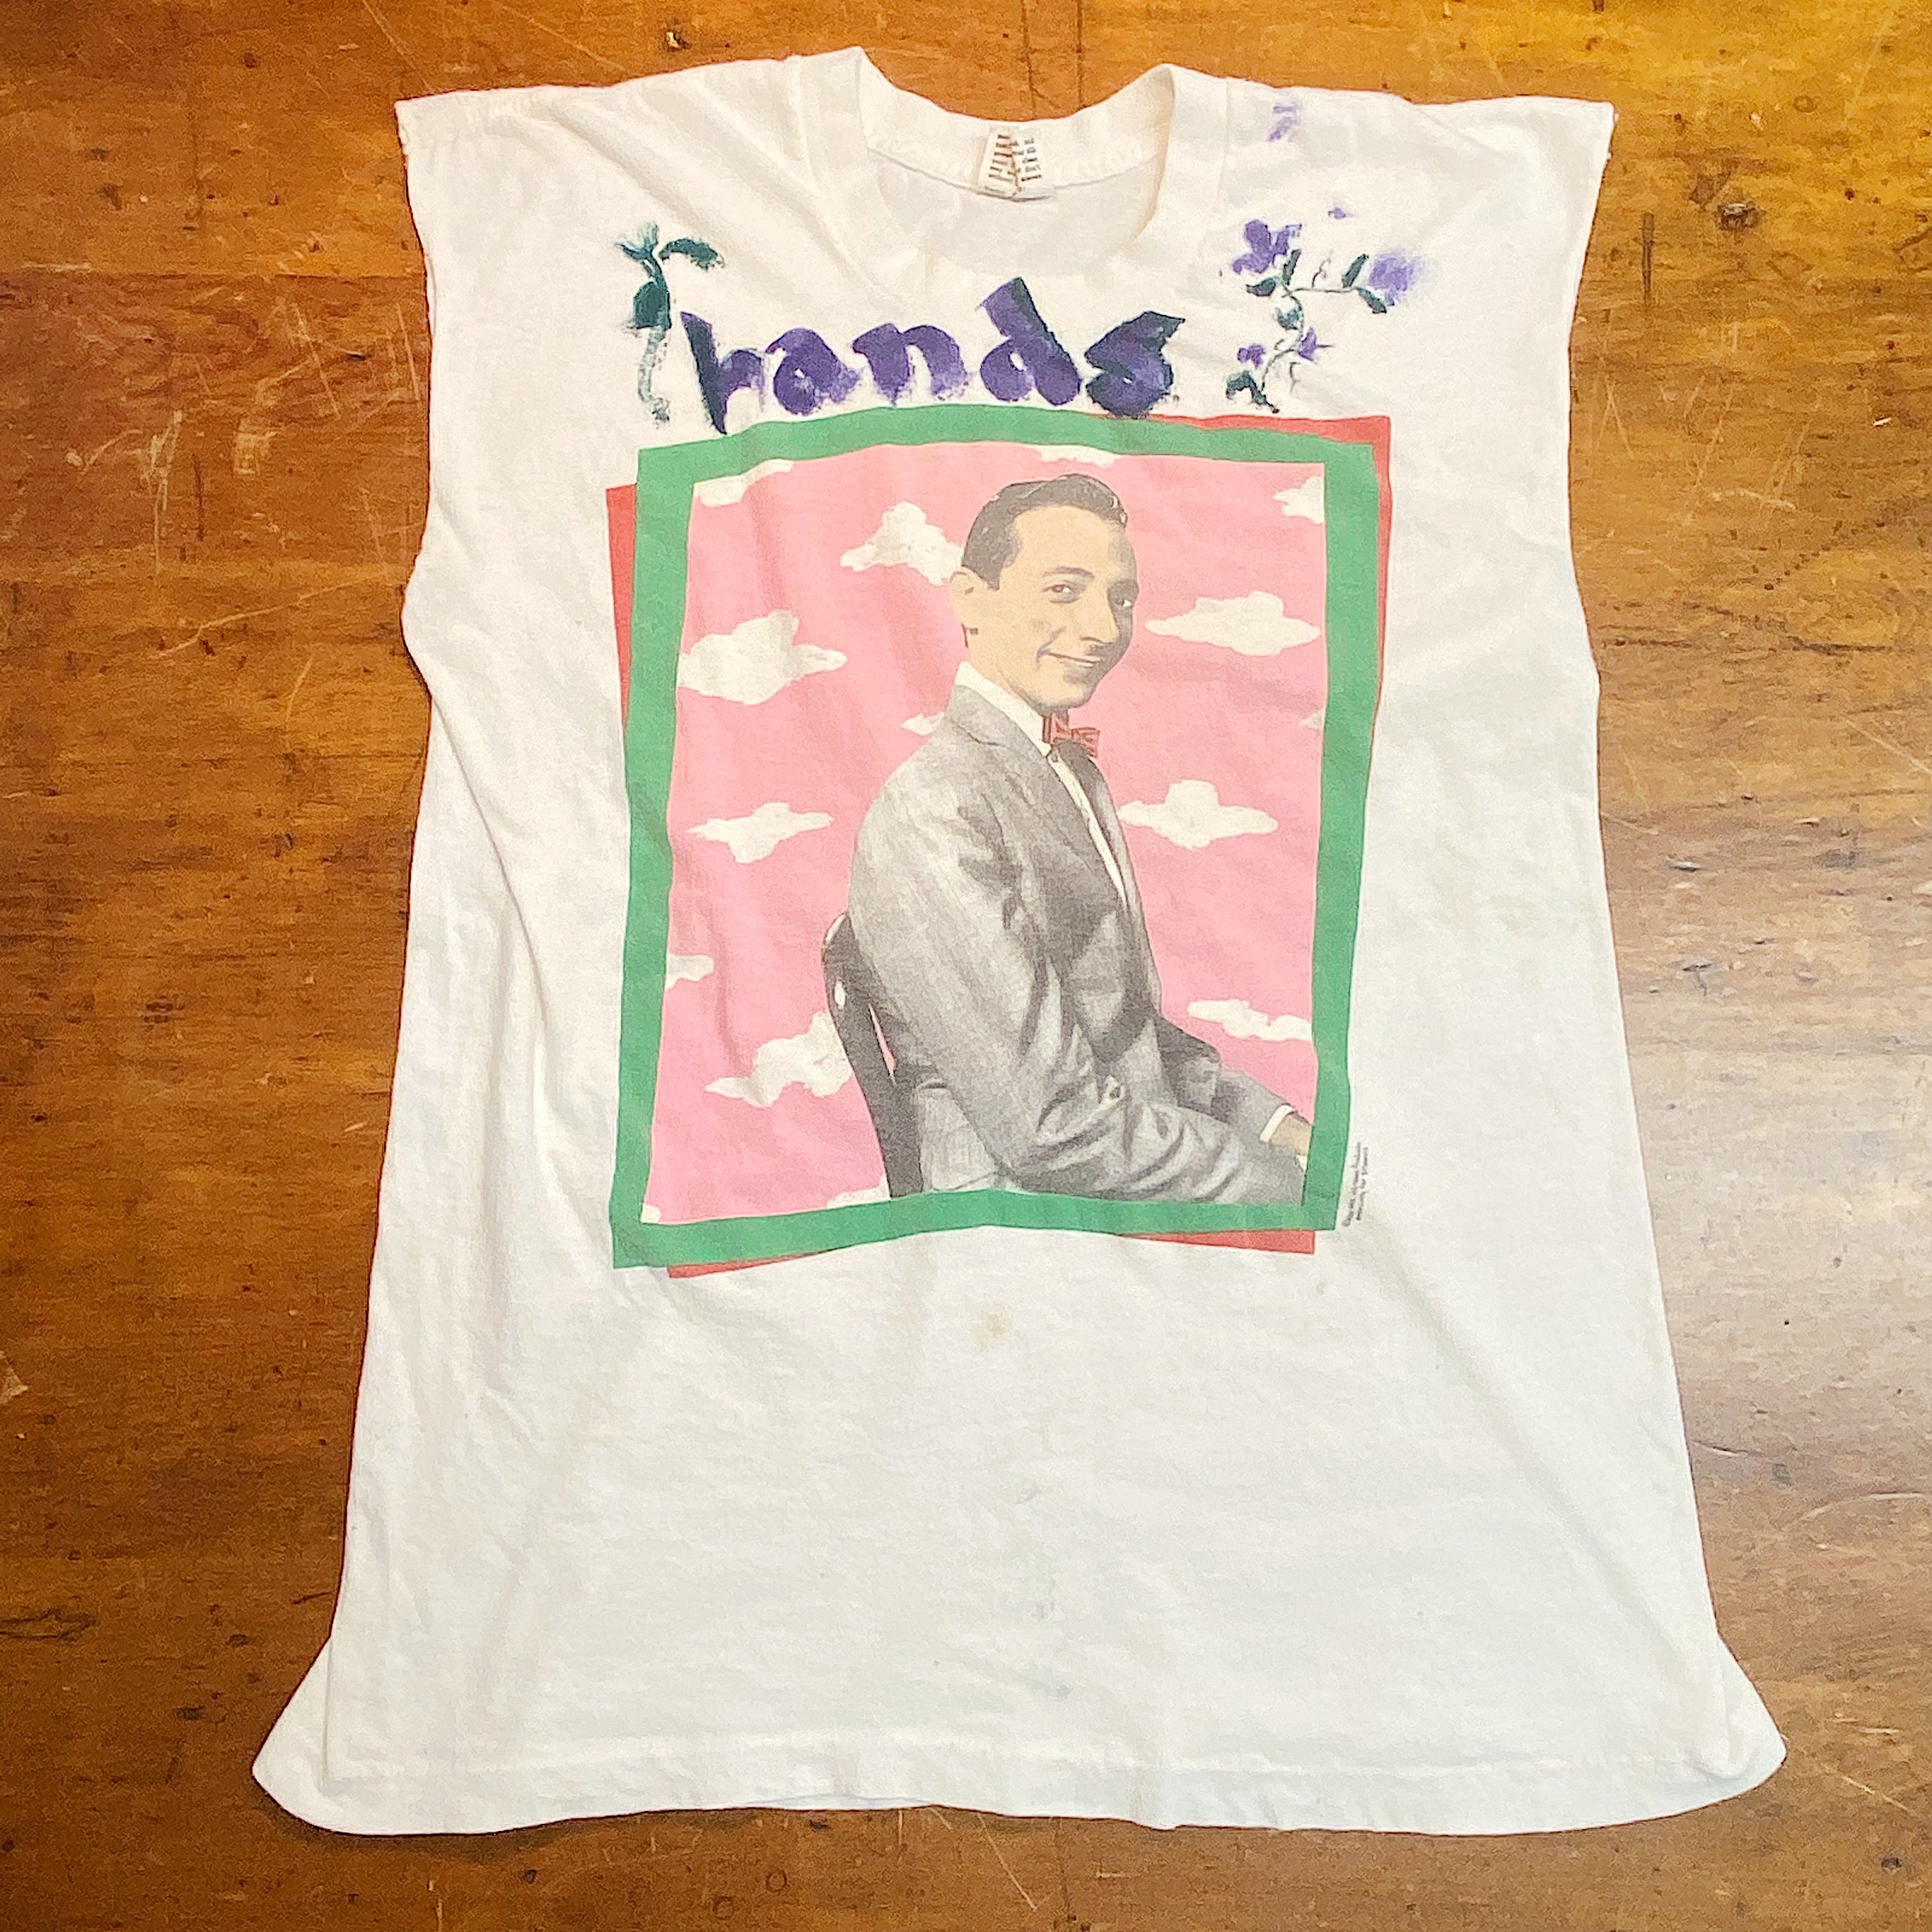 1980s Peewee Herman T-Shirt with Hand Painting 